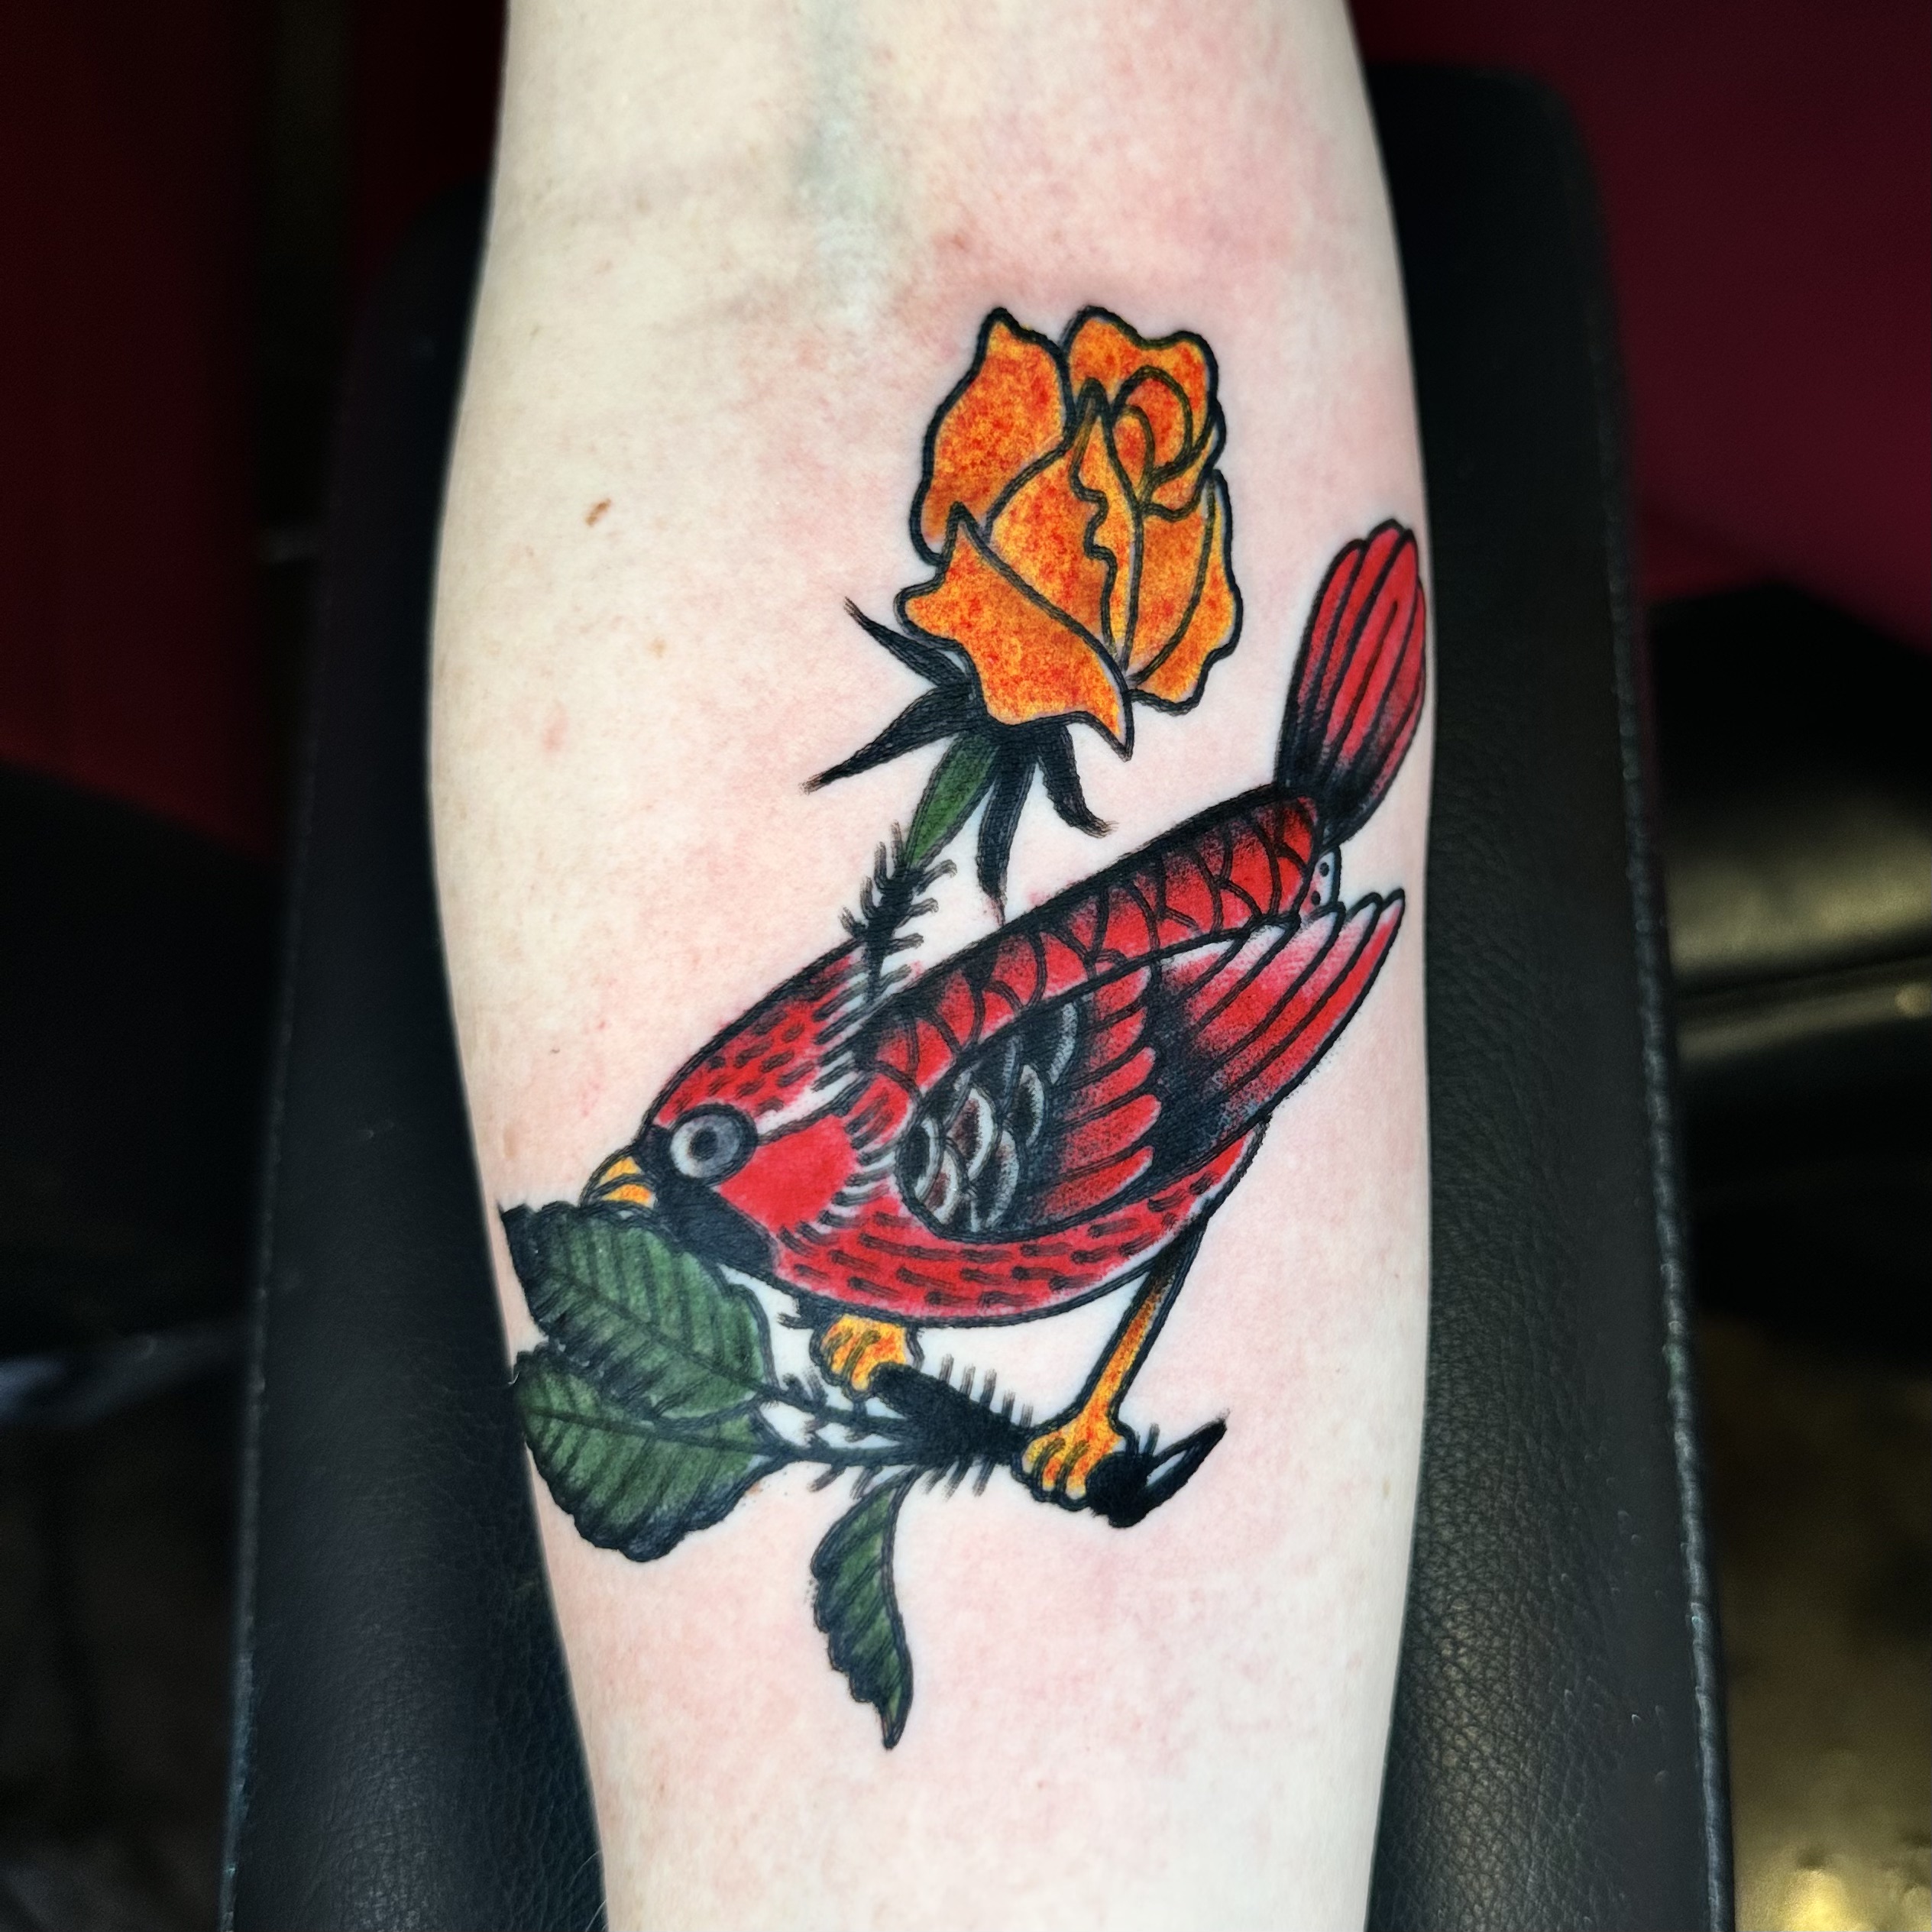 Tattoo of a red bird and an orange flower